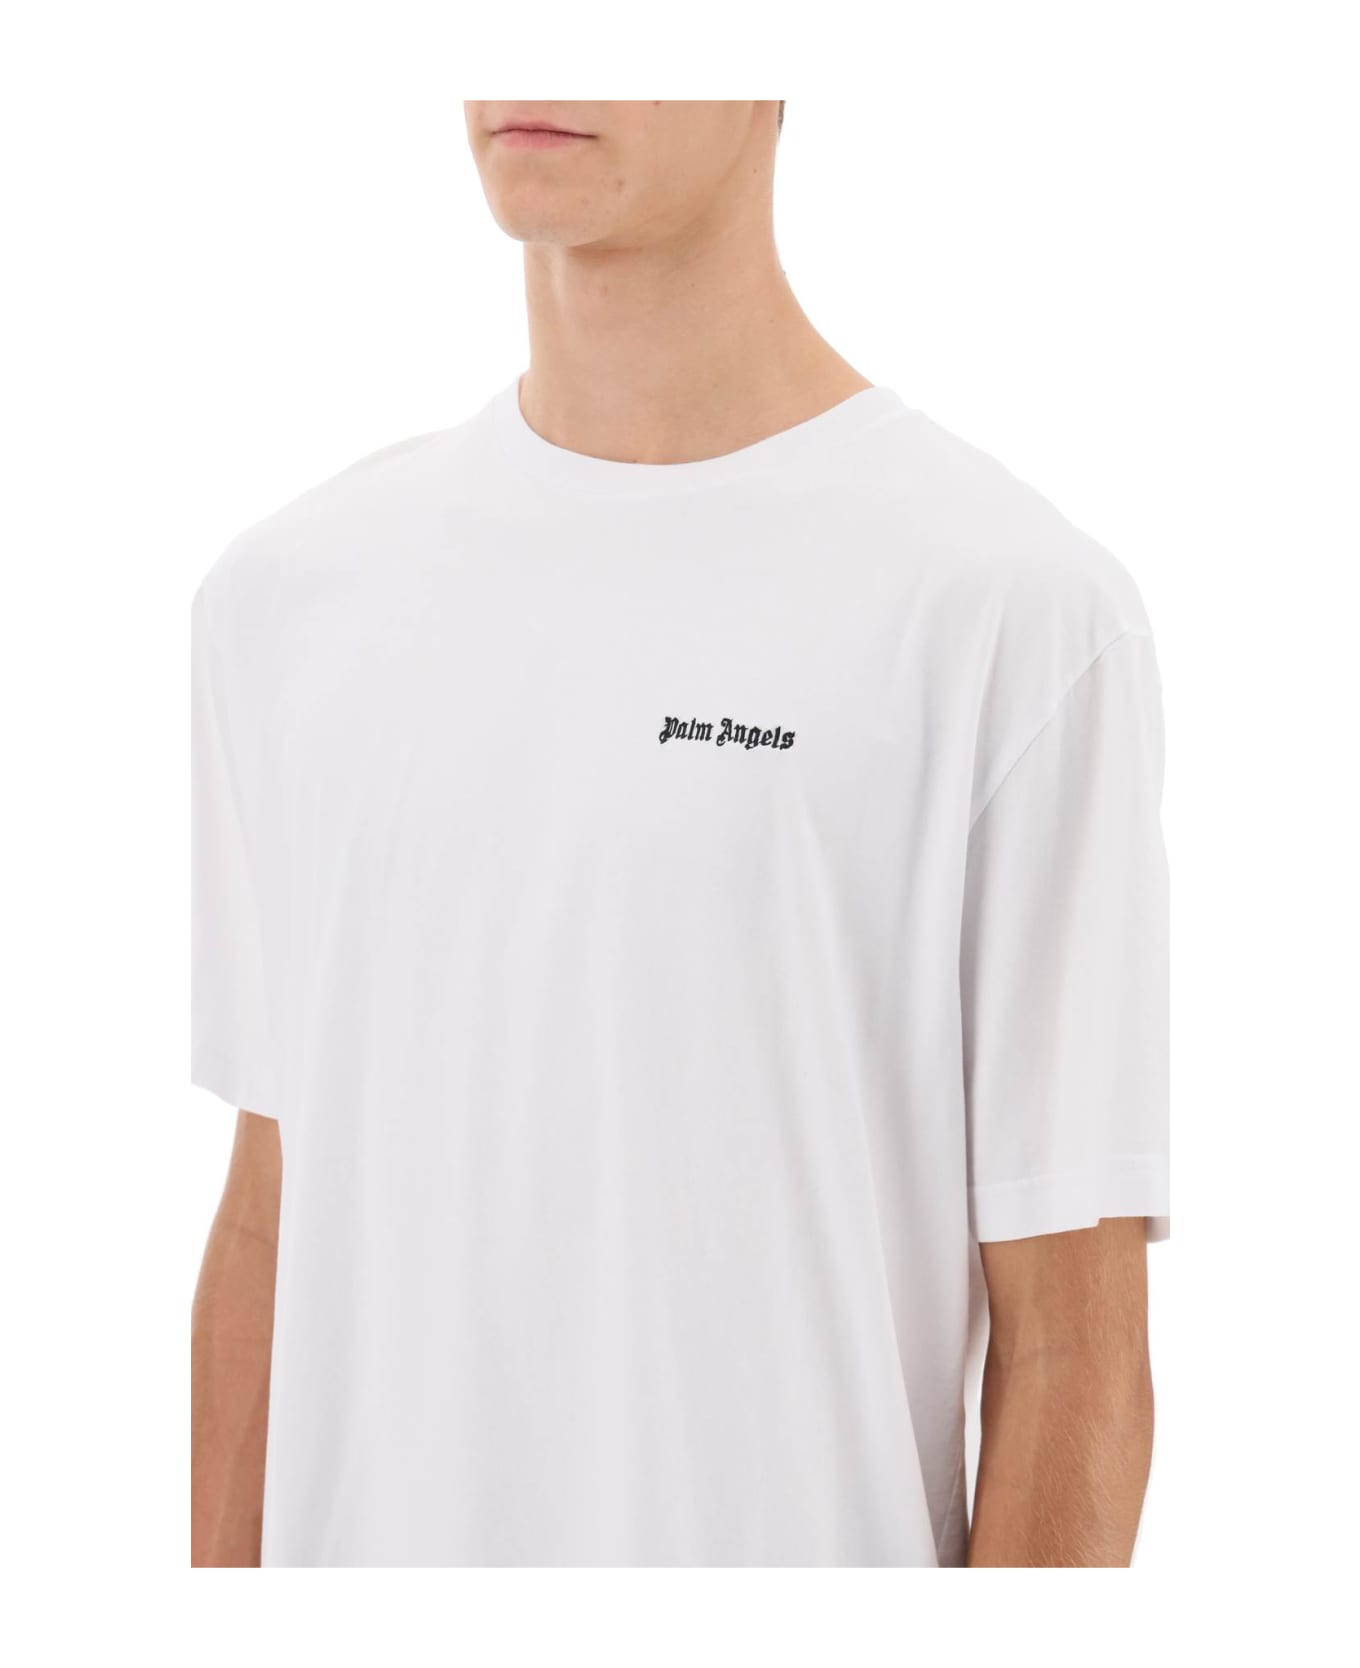 Palm Angels Embroidered Logo T-shirt - White シャツ